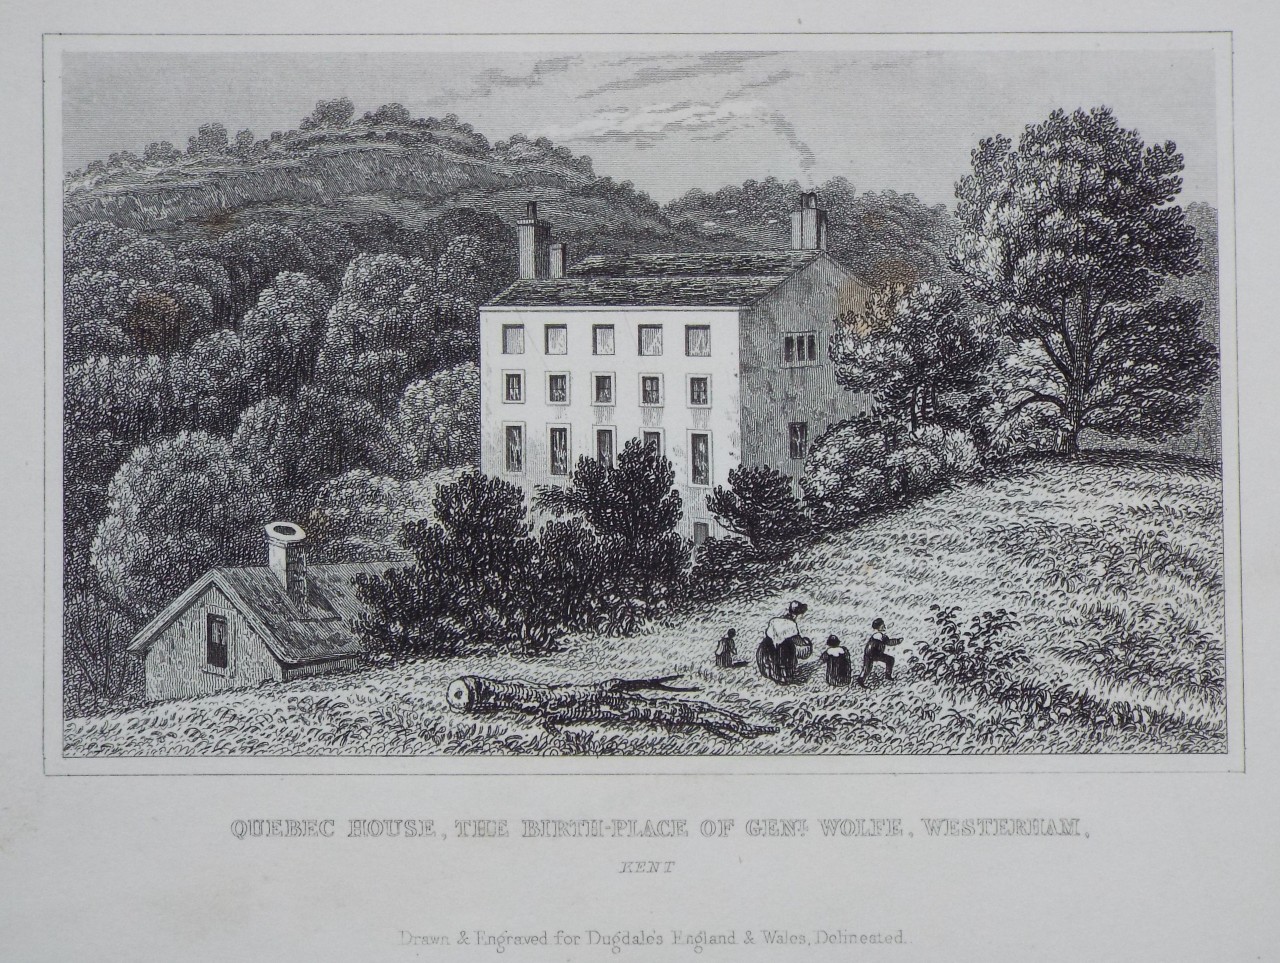 Print - Quebec House, the Birth-place of Genl. Wolfe, Westerham. Kent.